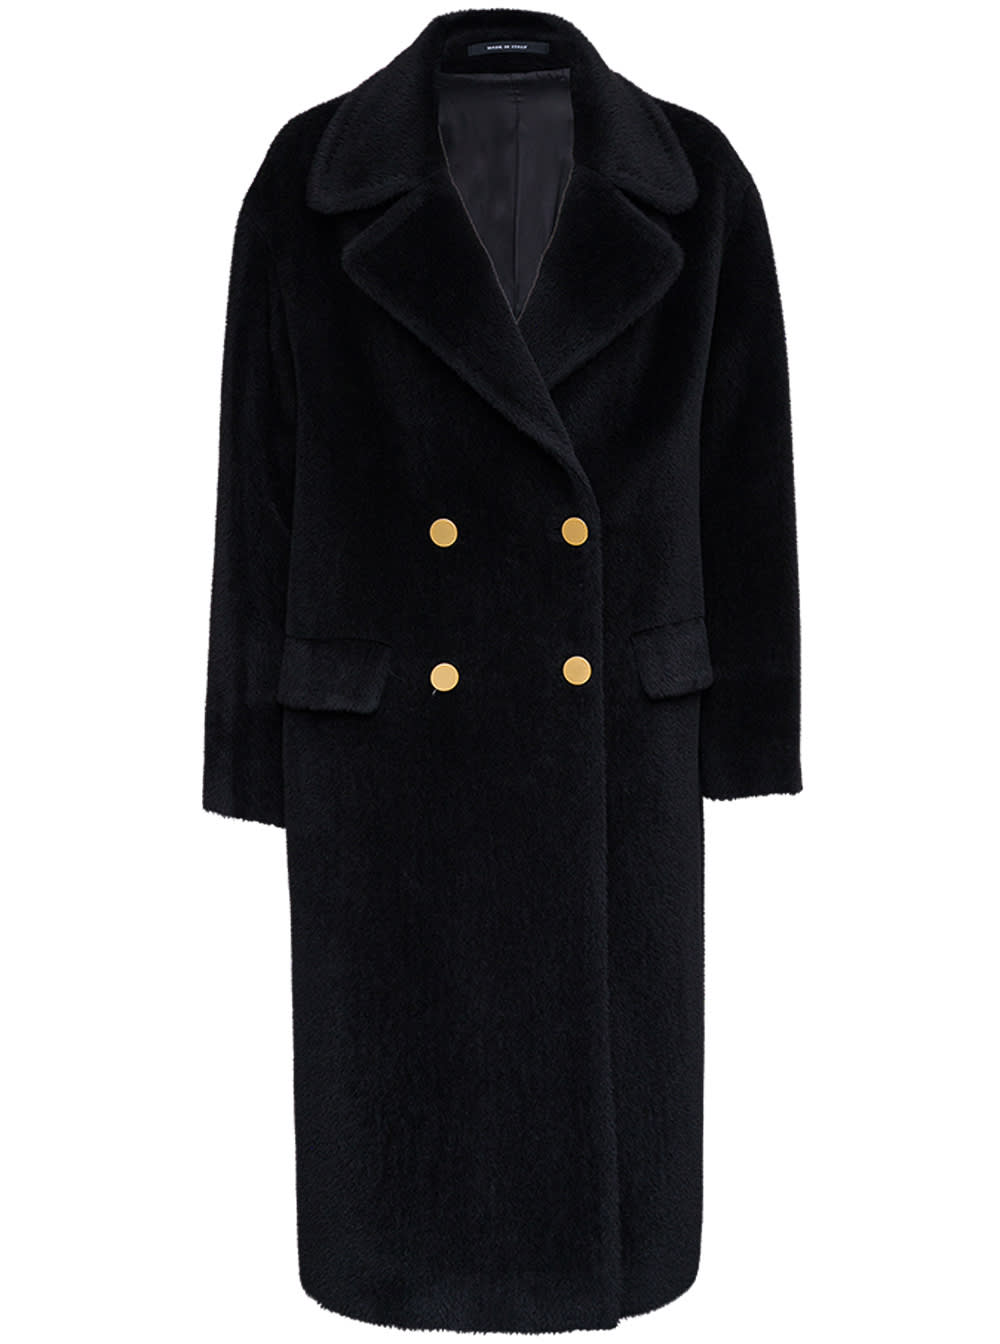 Tagliatore Double-breasted Brushed Wool Black Long Coat